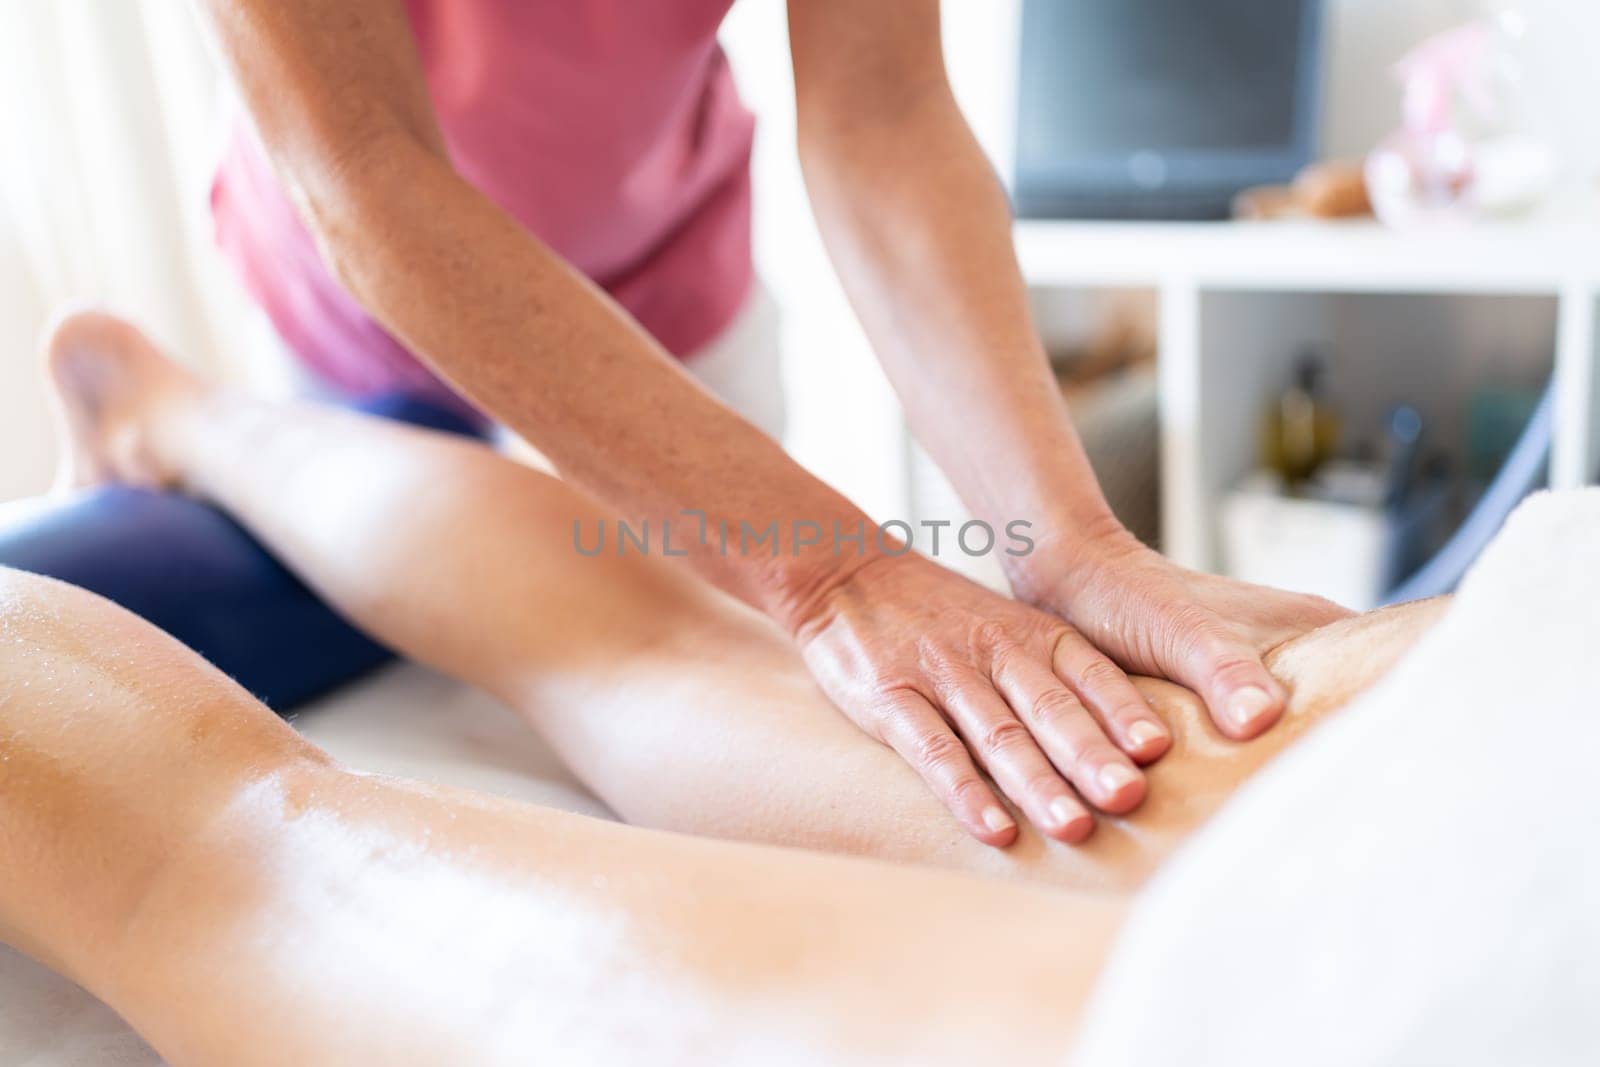 Crop masseuse rubbing oily skin of client during body massage in clinic by javiindy